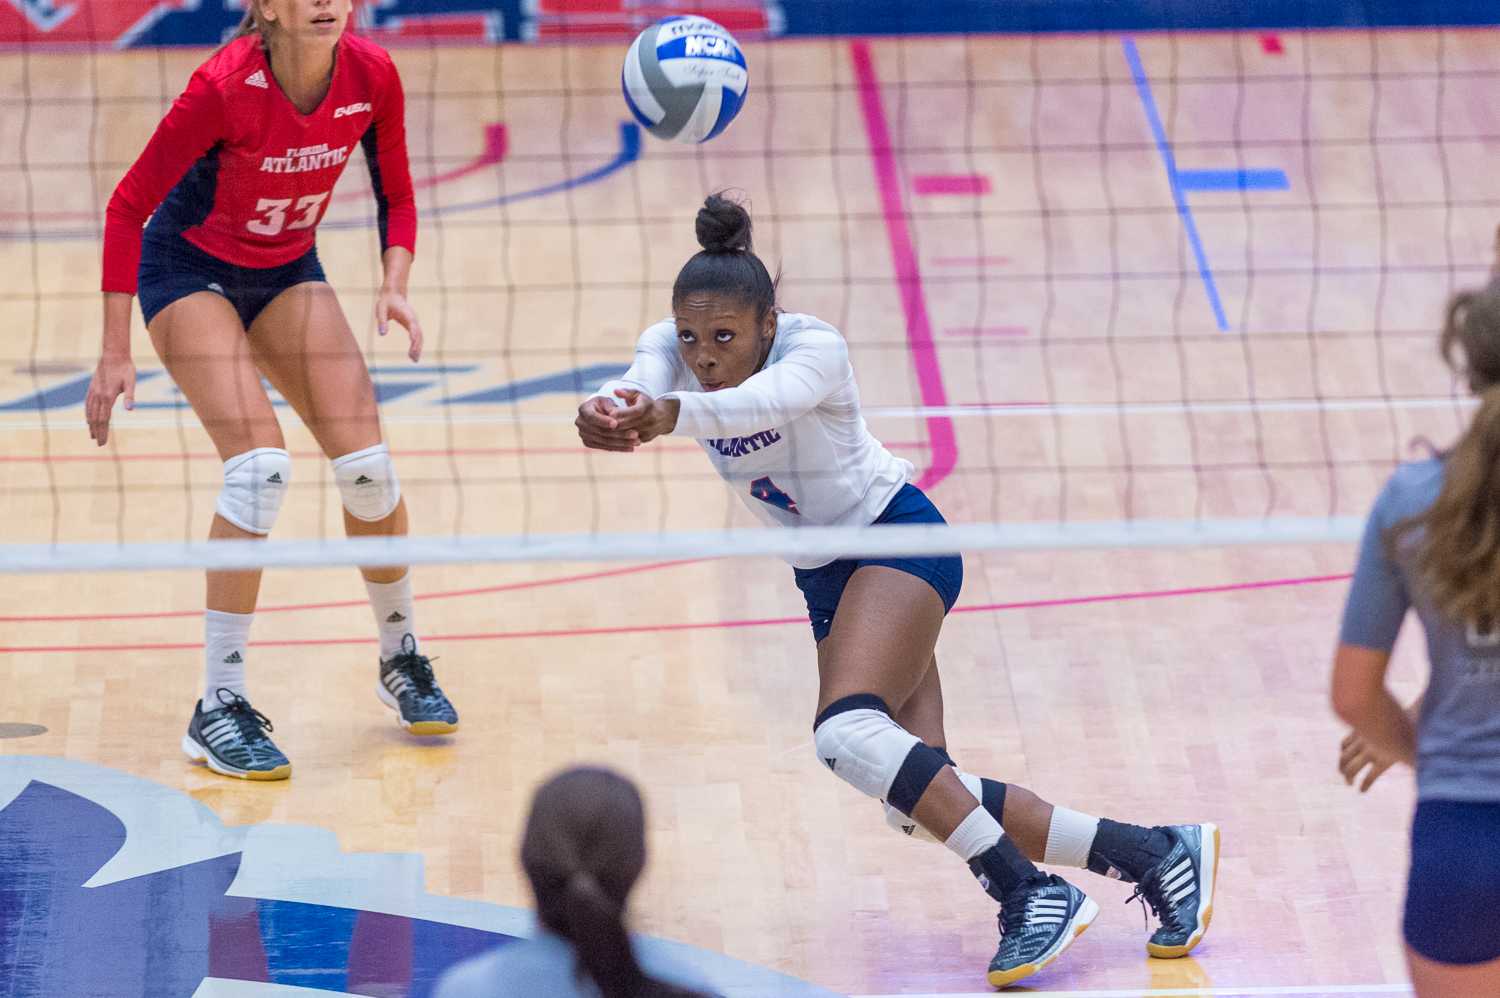 FAU junior outside hitter Raveen Golston (4) runs to dig the ball during Friday’s match versus UTEP. Golston played as the team’s libero during the match. Max Jackson | Staff Photographer